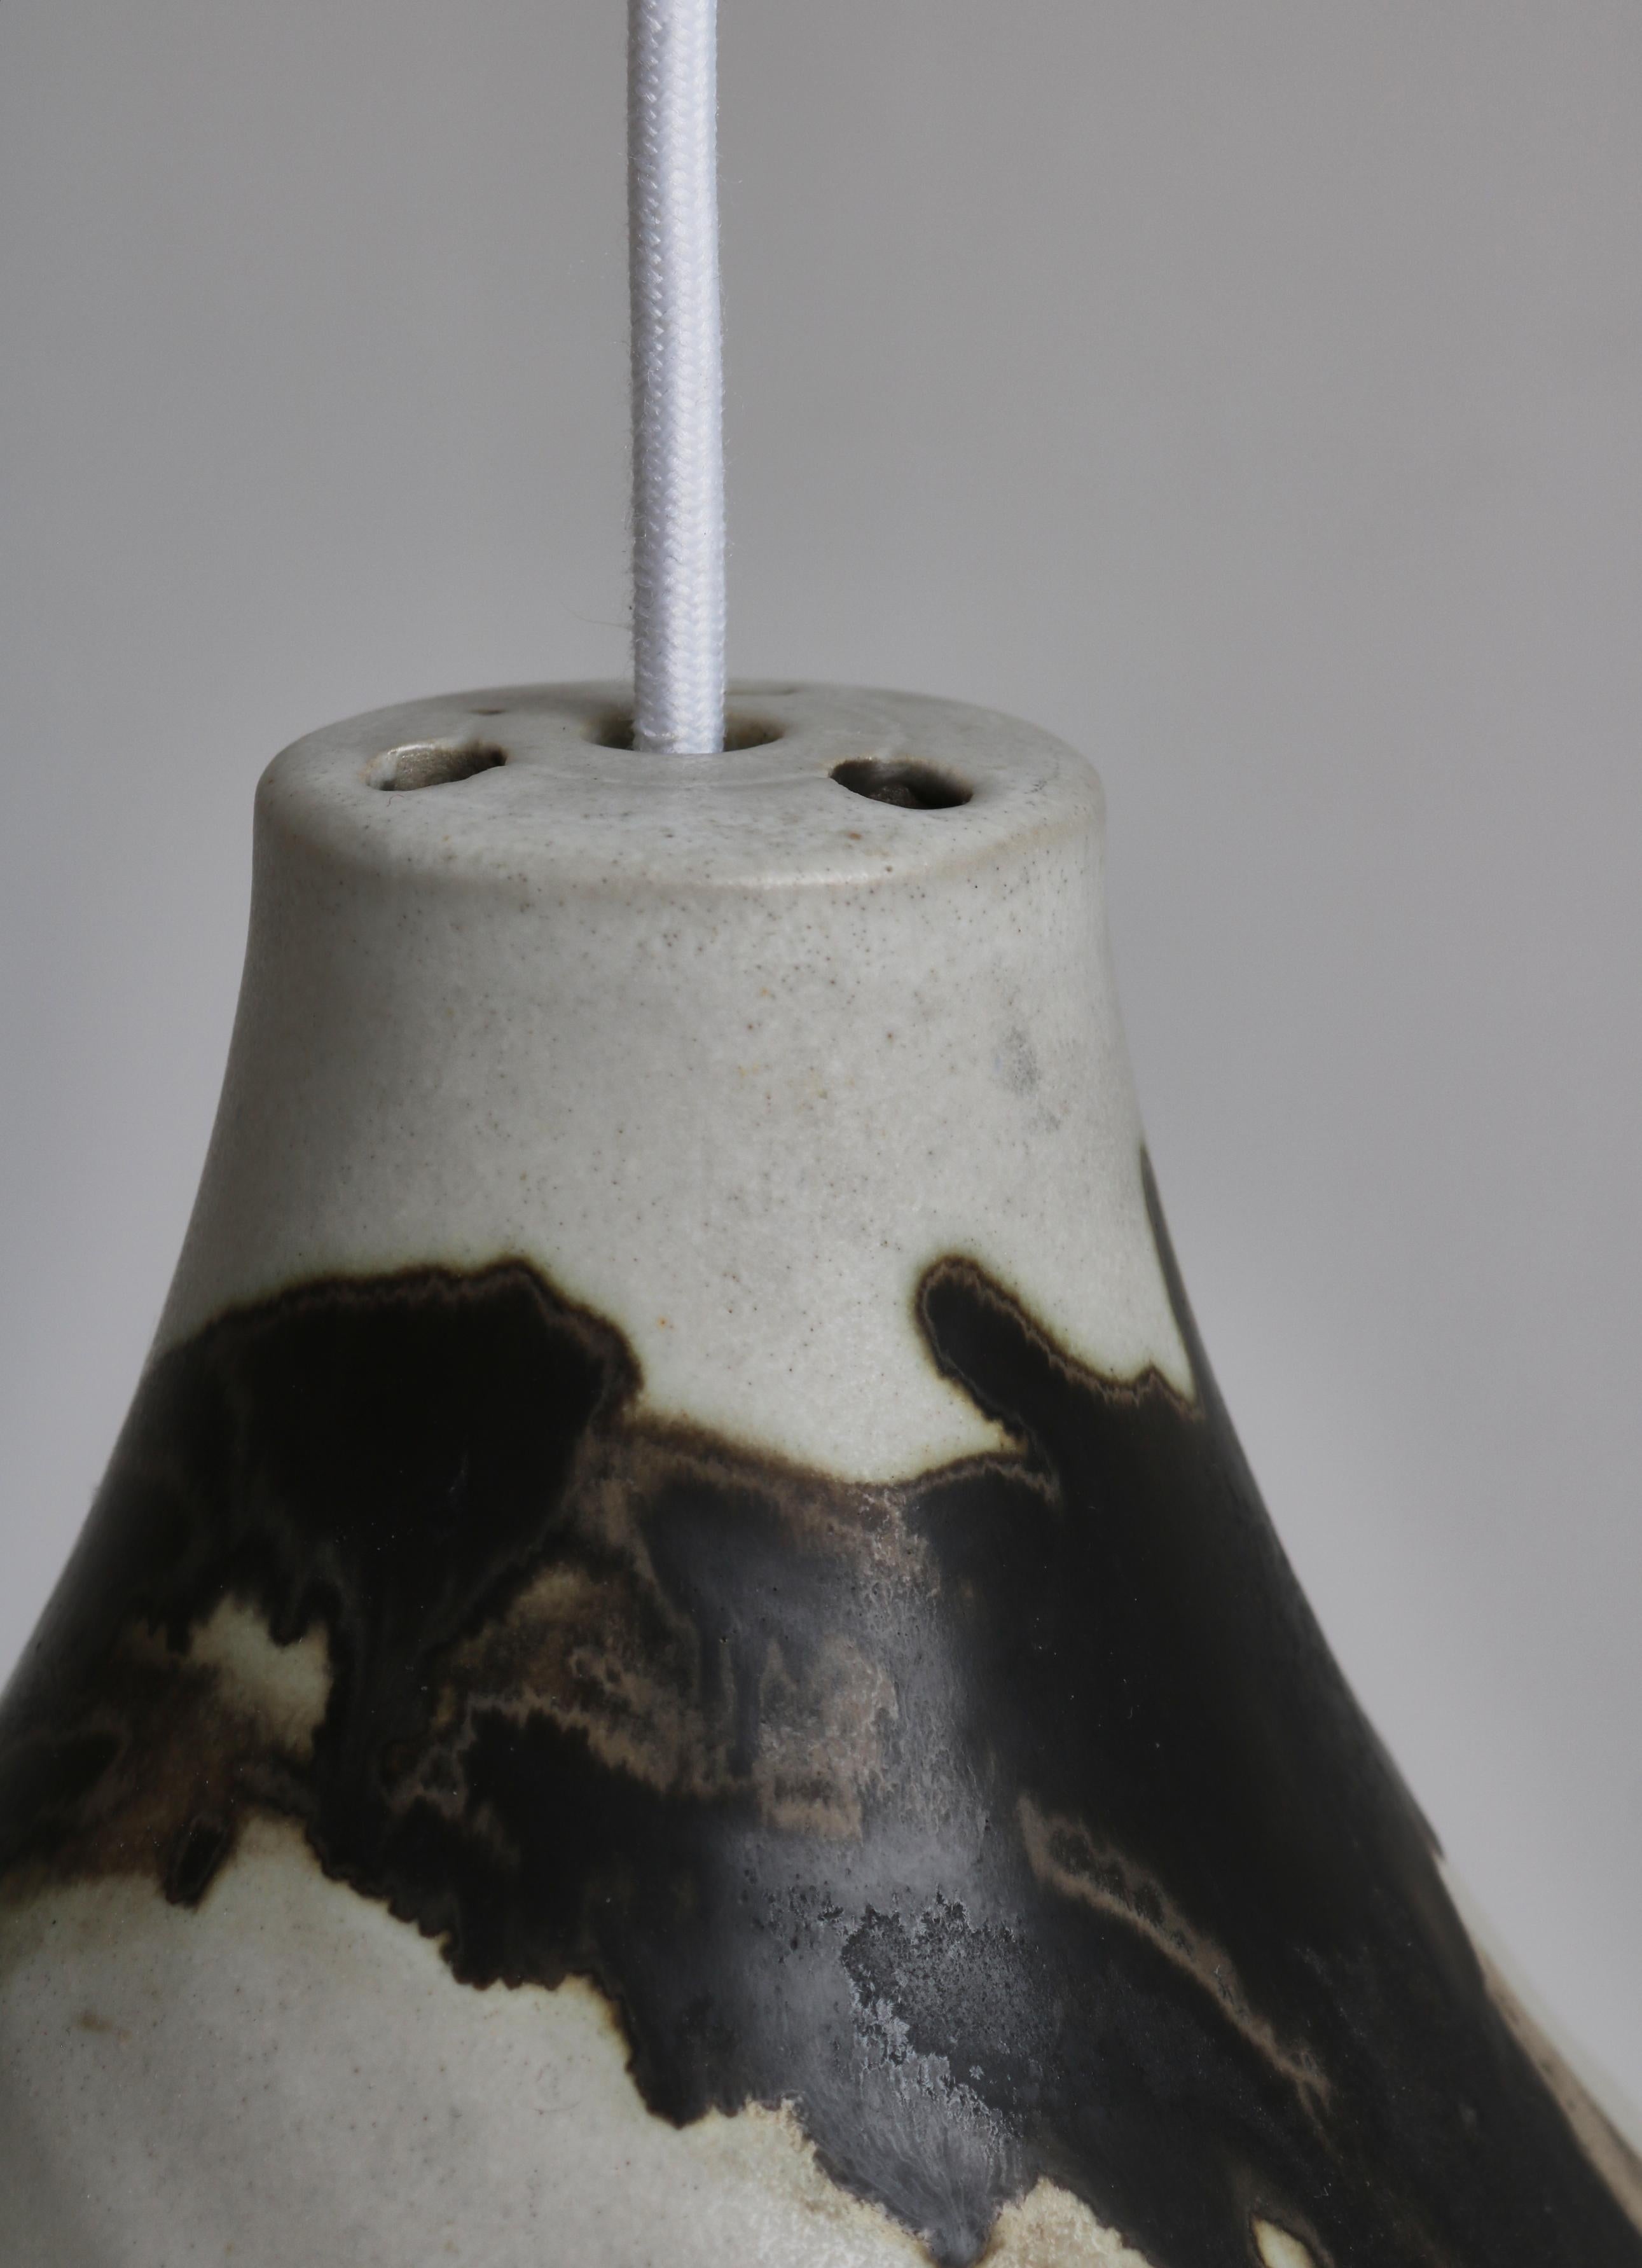 Ceramic Unique Danish Søholm Stoneware Lamps in Light Glazing and Earth Colors, 1960s For Sale